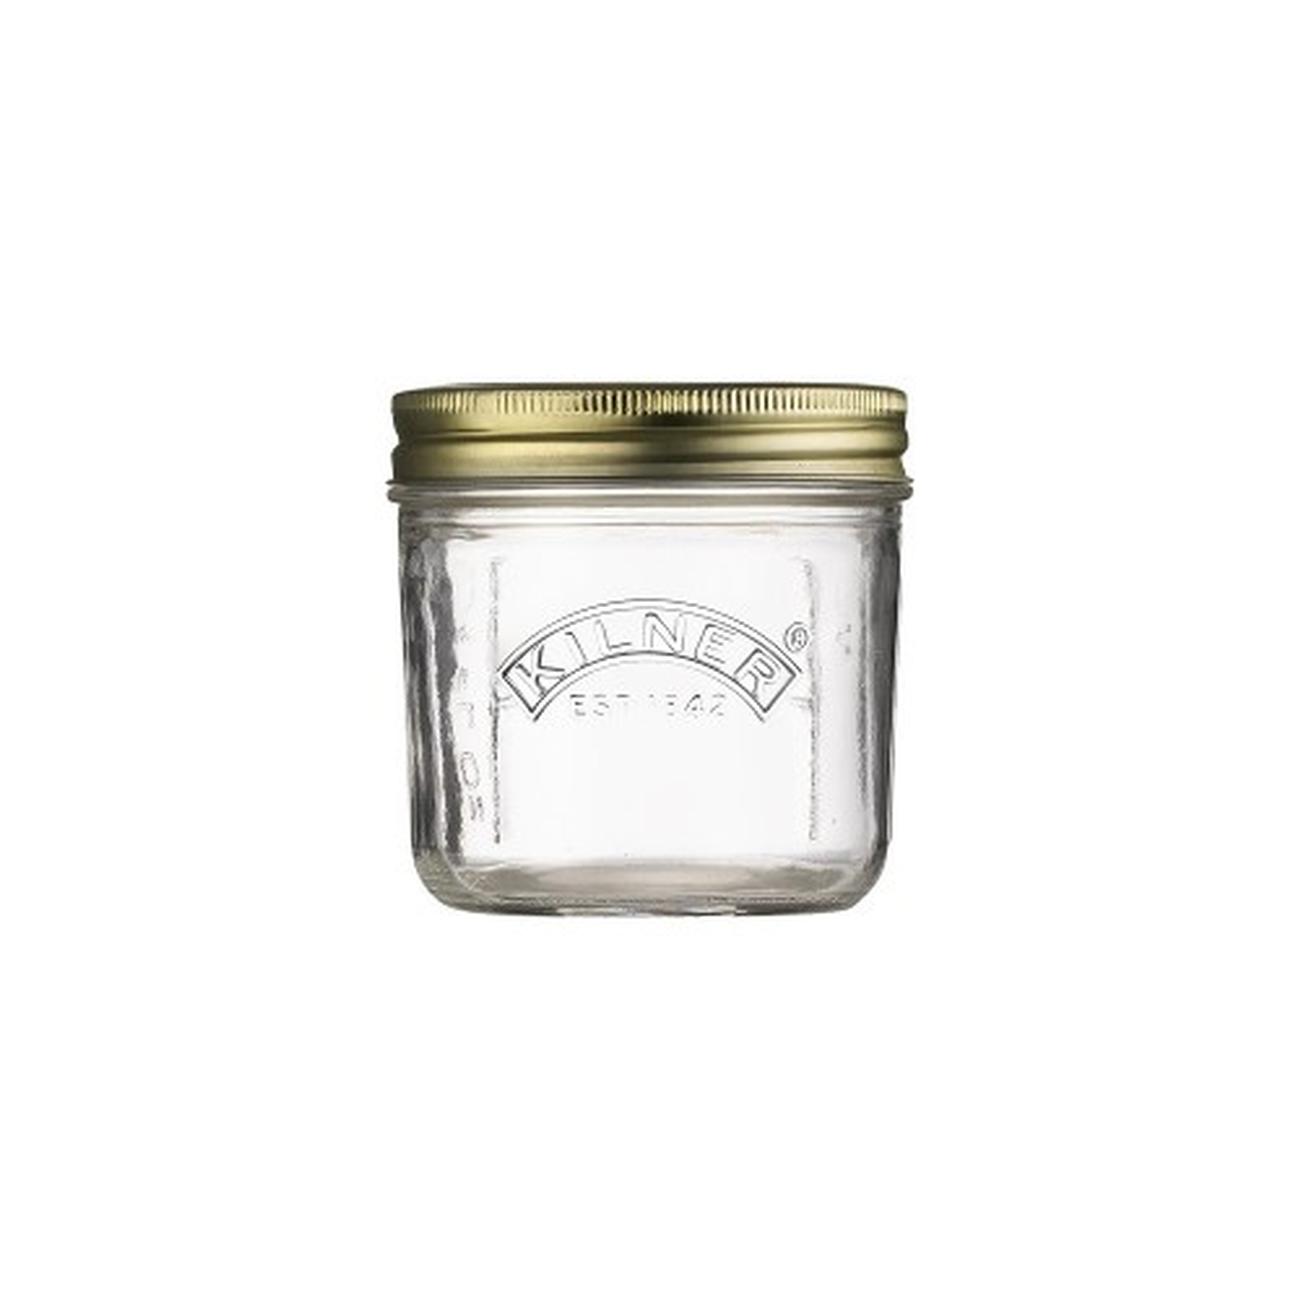 https://www.thekitchenwhisk.ie/contentfiles/productImages/Large/Kilner-Wide-Mouth-Preserve-Jar-200ml.jpg